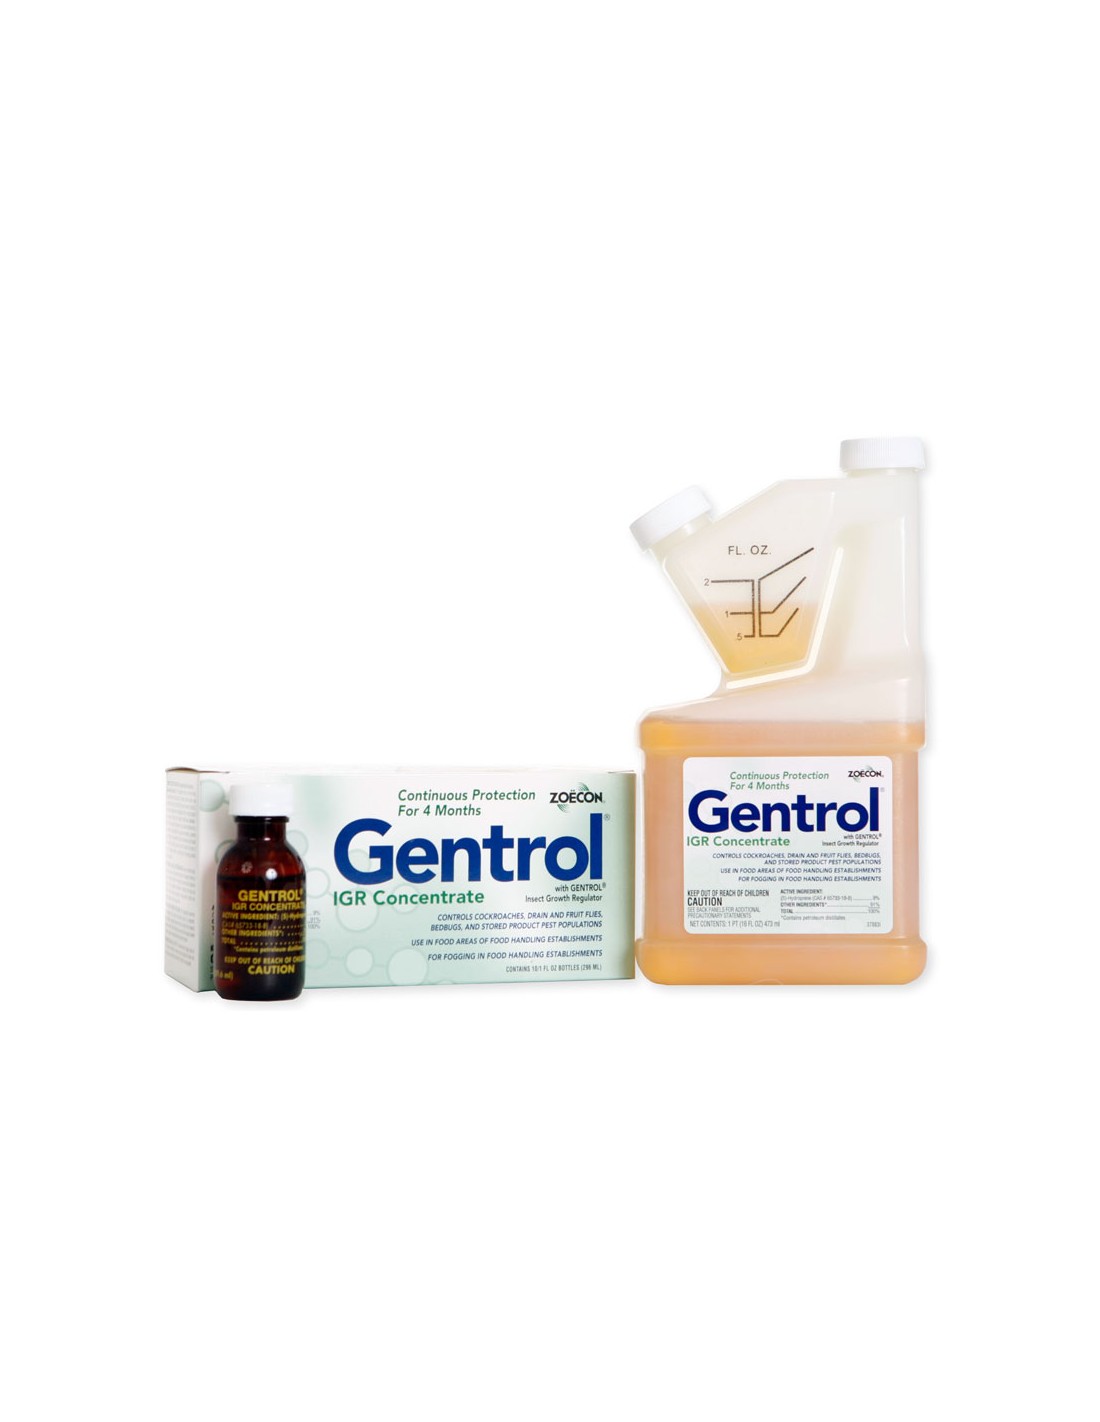 Gentrol IGR Concentrate with GENCOR Questions & Answers